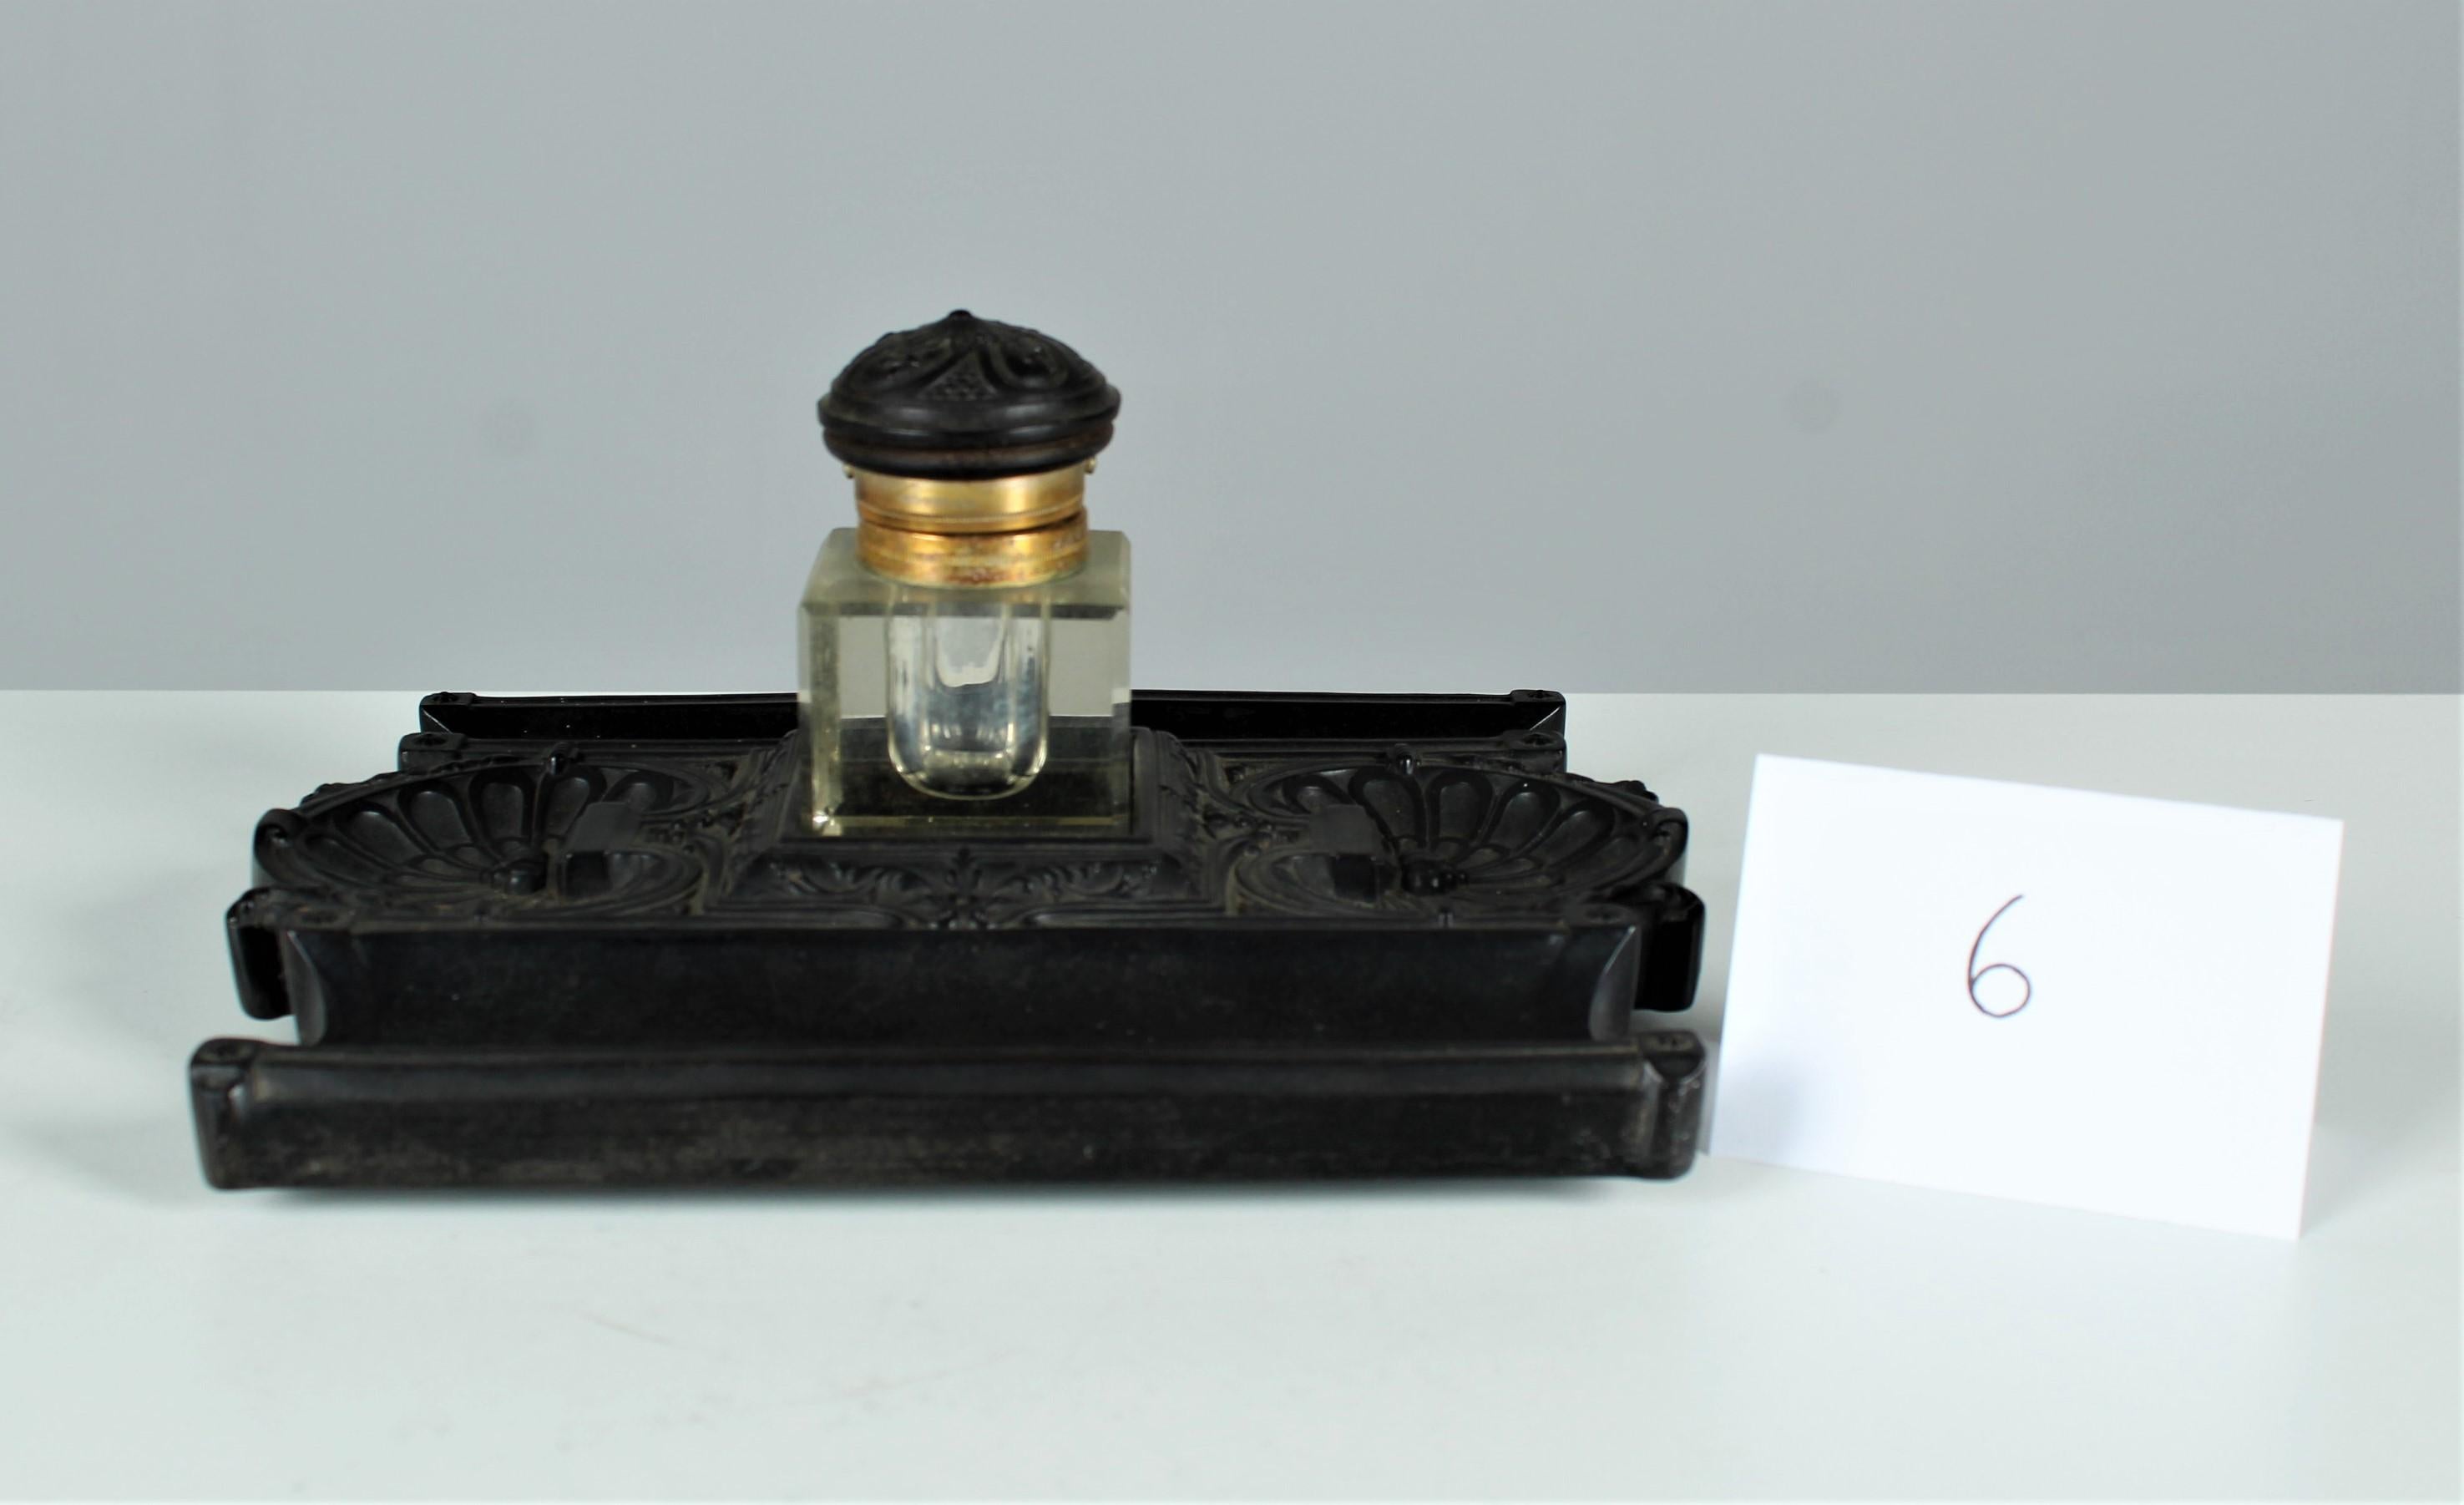 Late Victorian Antique Gutta-Percha Inkwell, Desk Pen Tray With Glass Insert, Circa 1880s For Sale